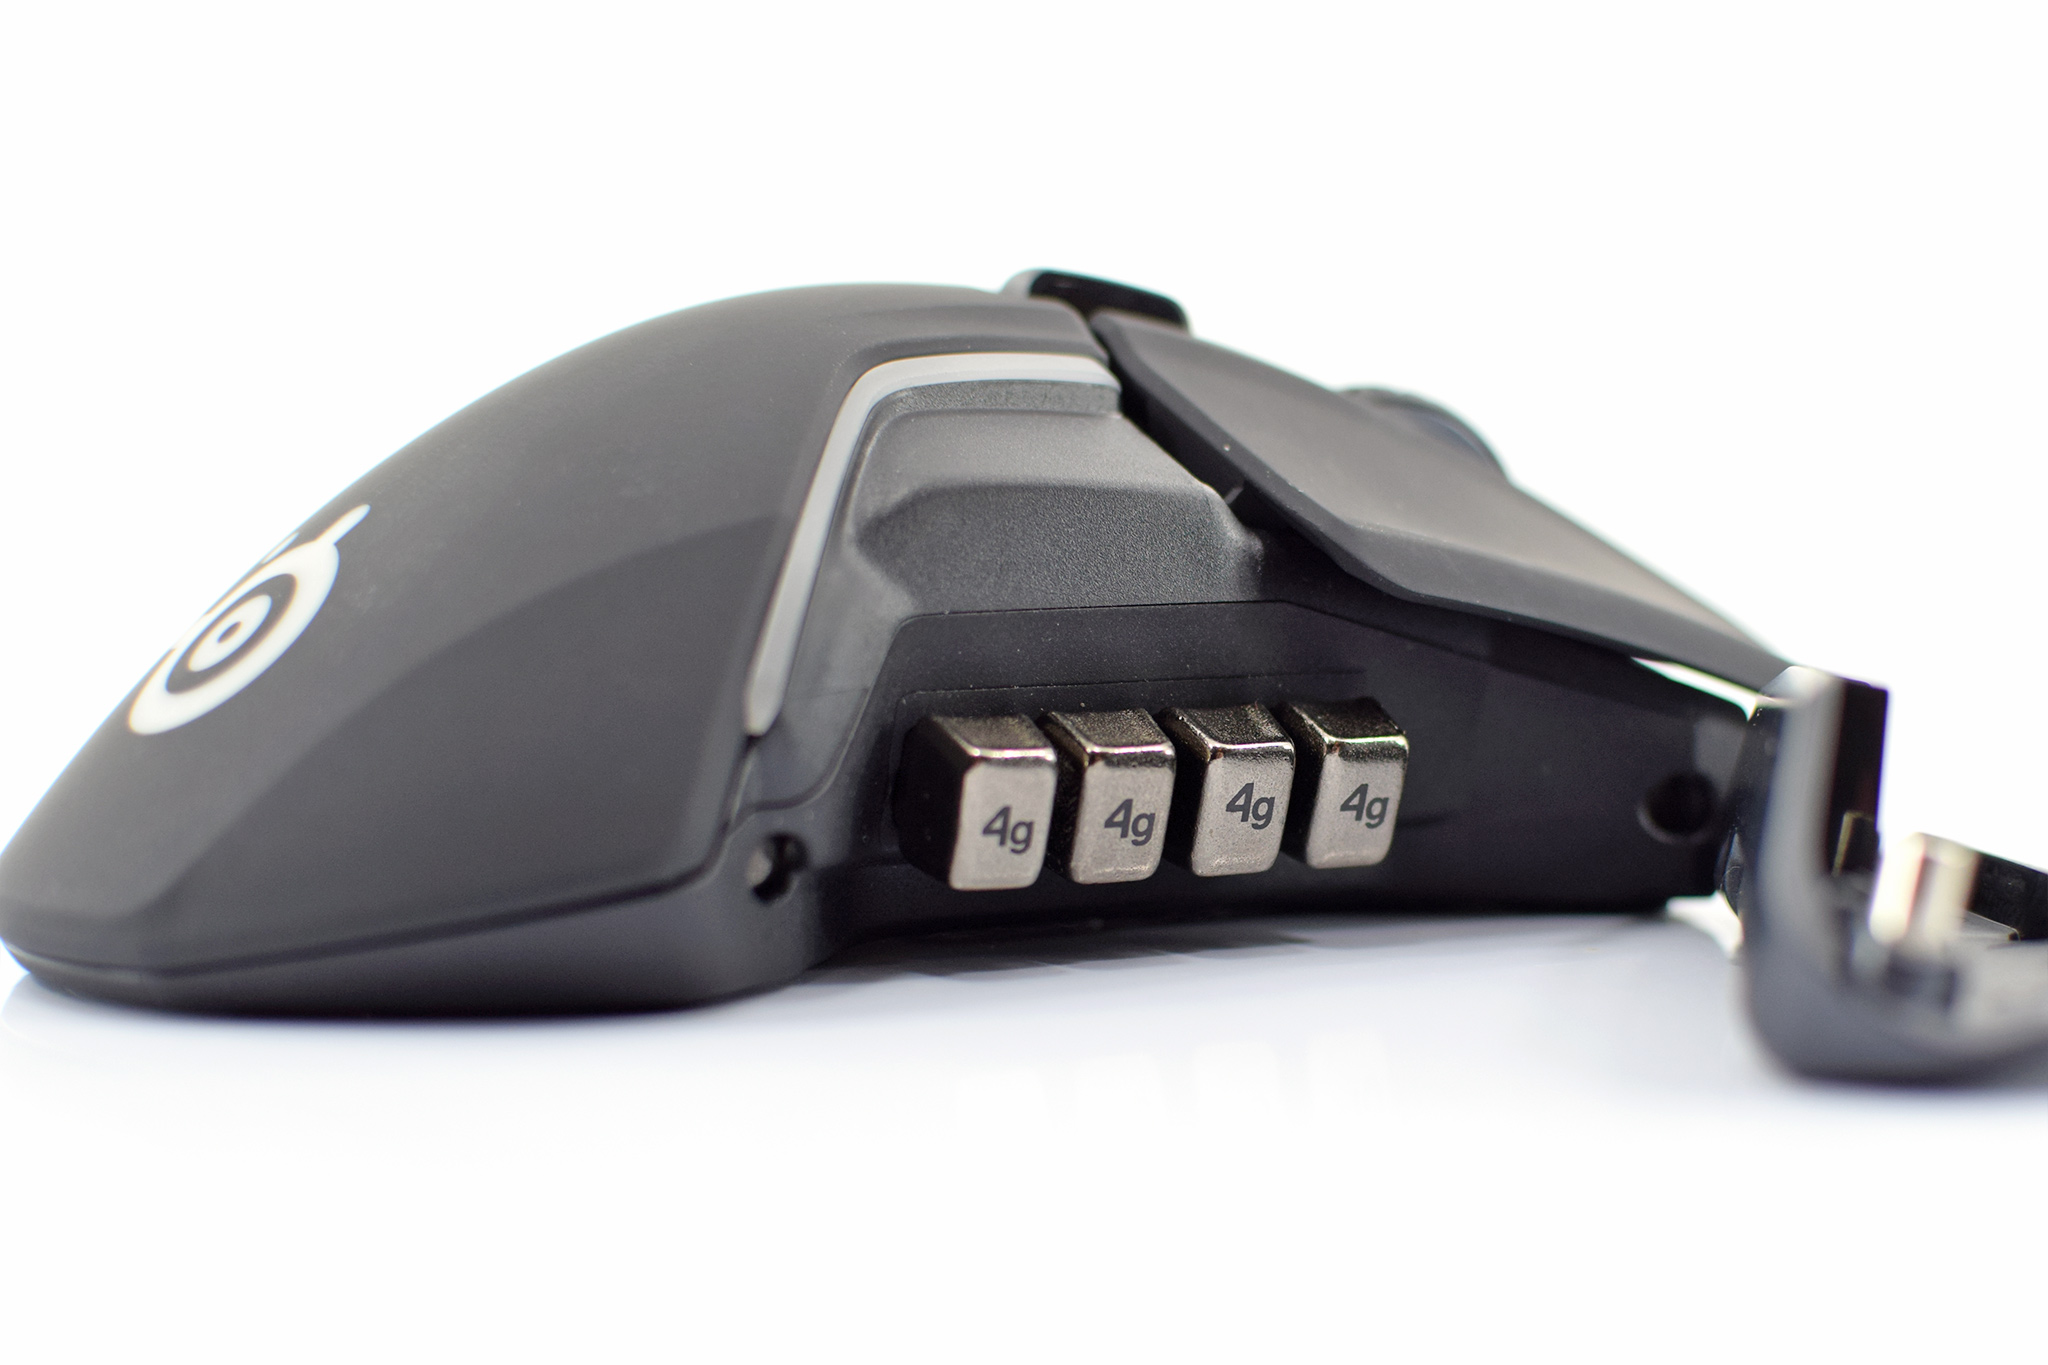 SteelSeries Mouse | KitGuru Rival Review 600